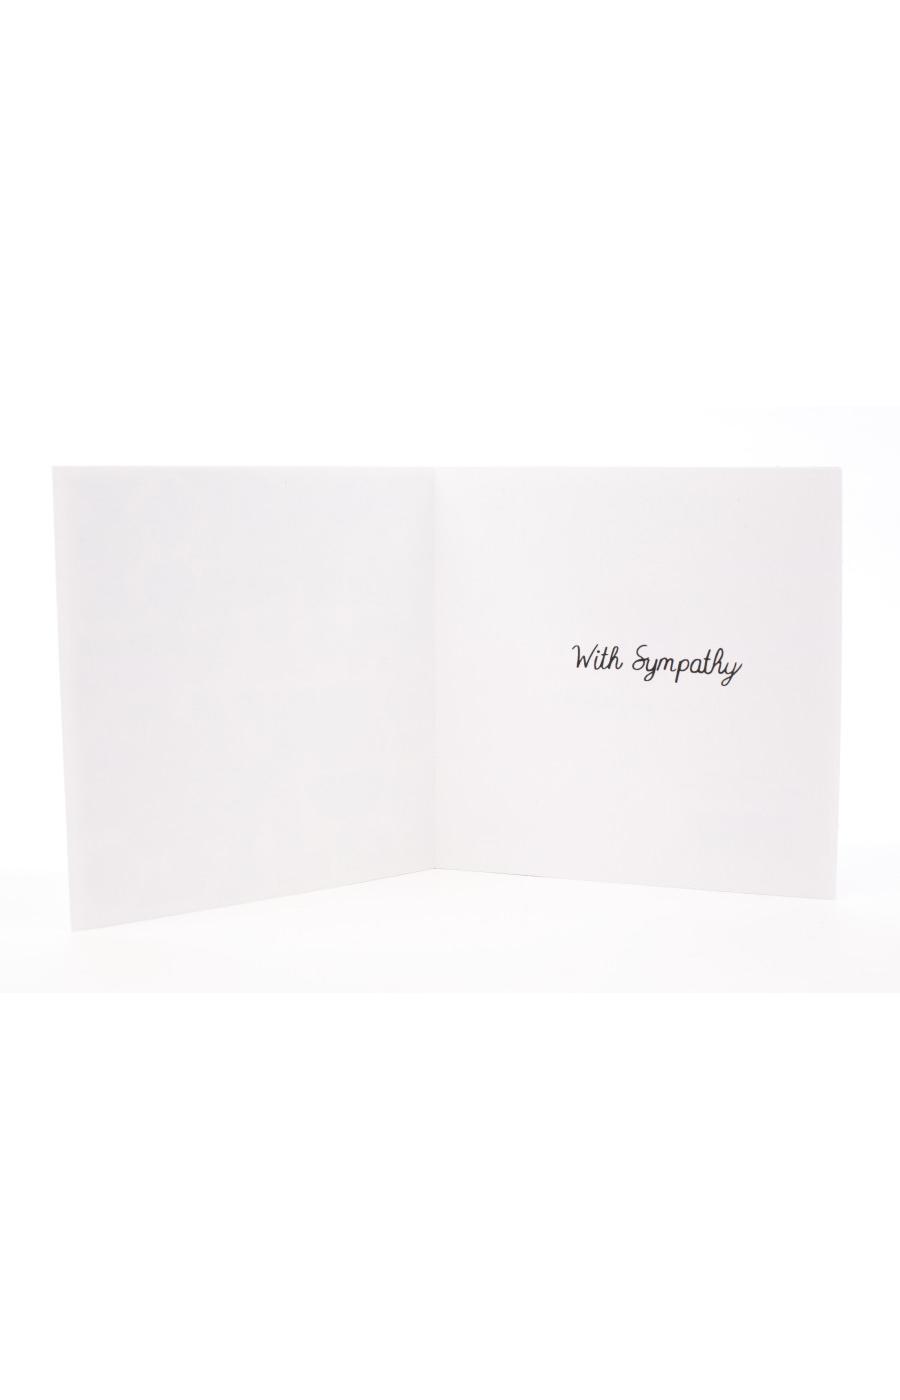 Hallmark Studio Ink Nothing Loved is Ever Lost Sympathy Card - E8; image 6 of 6